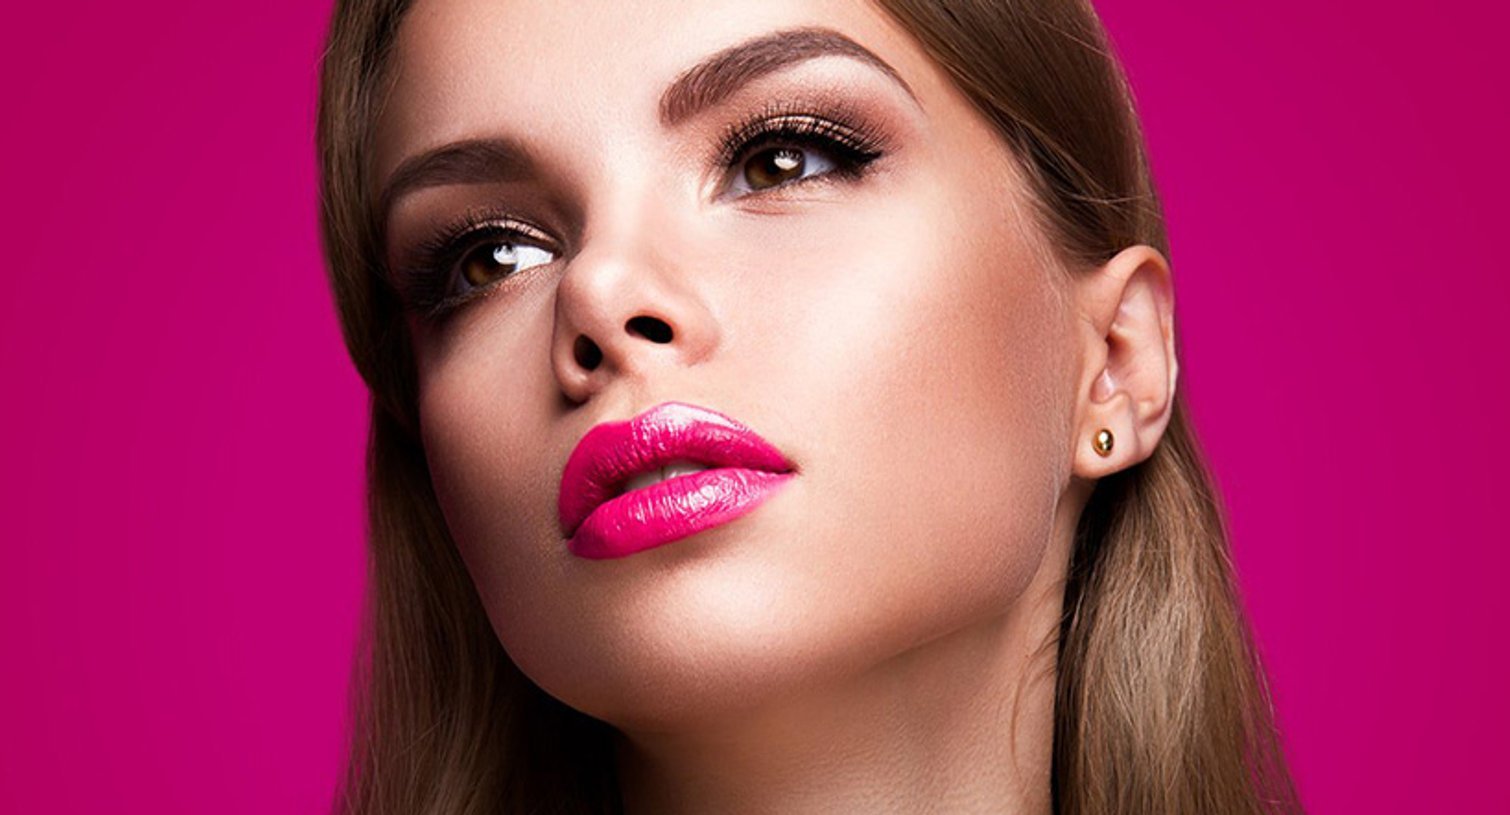 Loreal Paris BMAG Slideshow Our 20 Best Pink Lipsticks For Every Skin Tone Intro